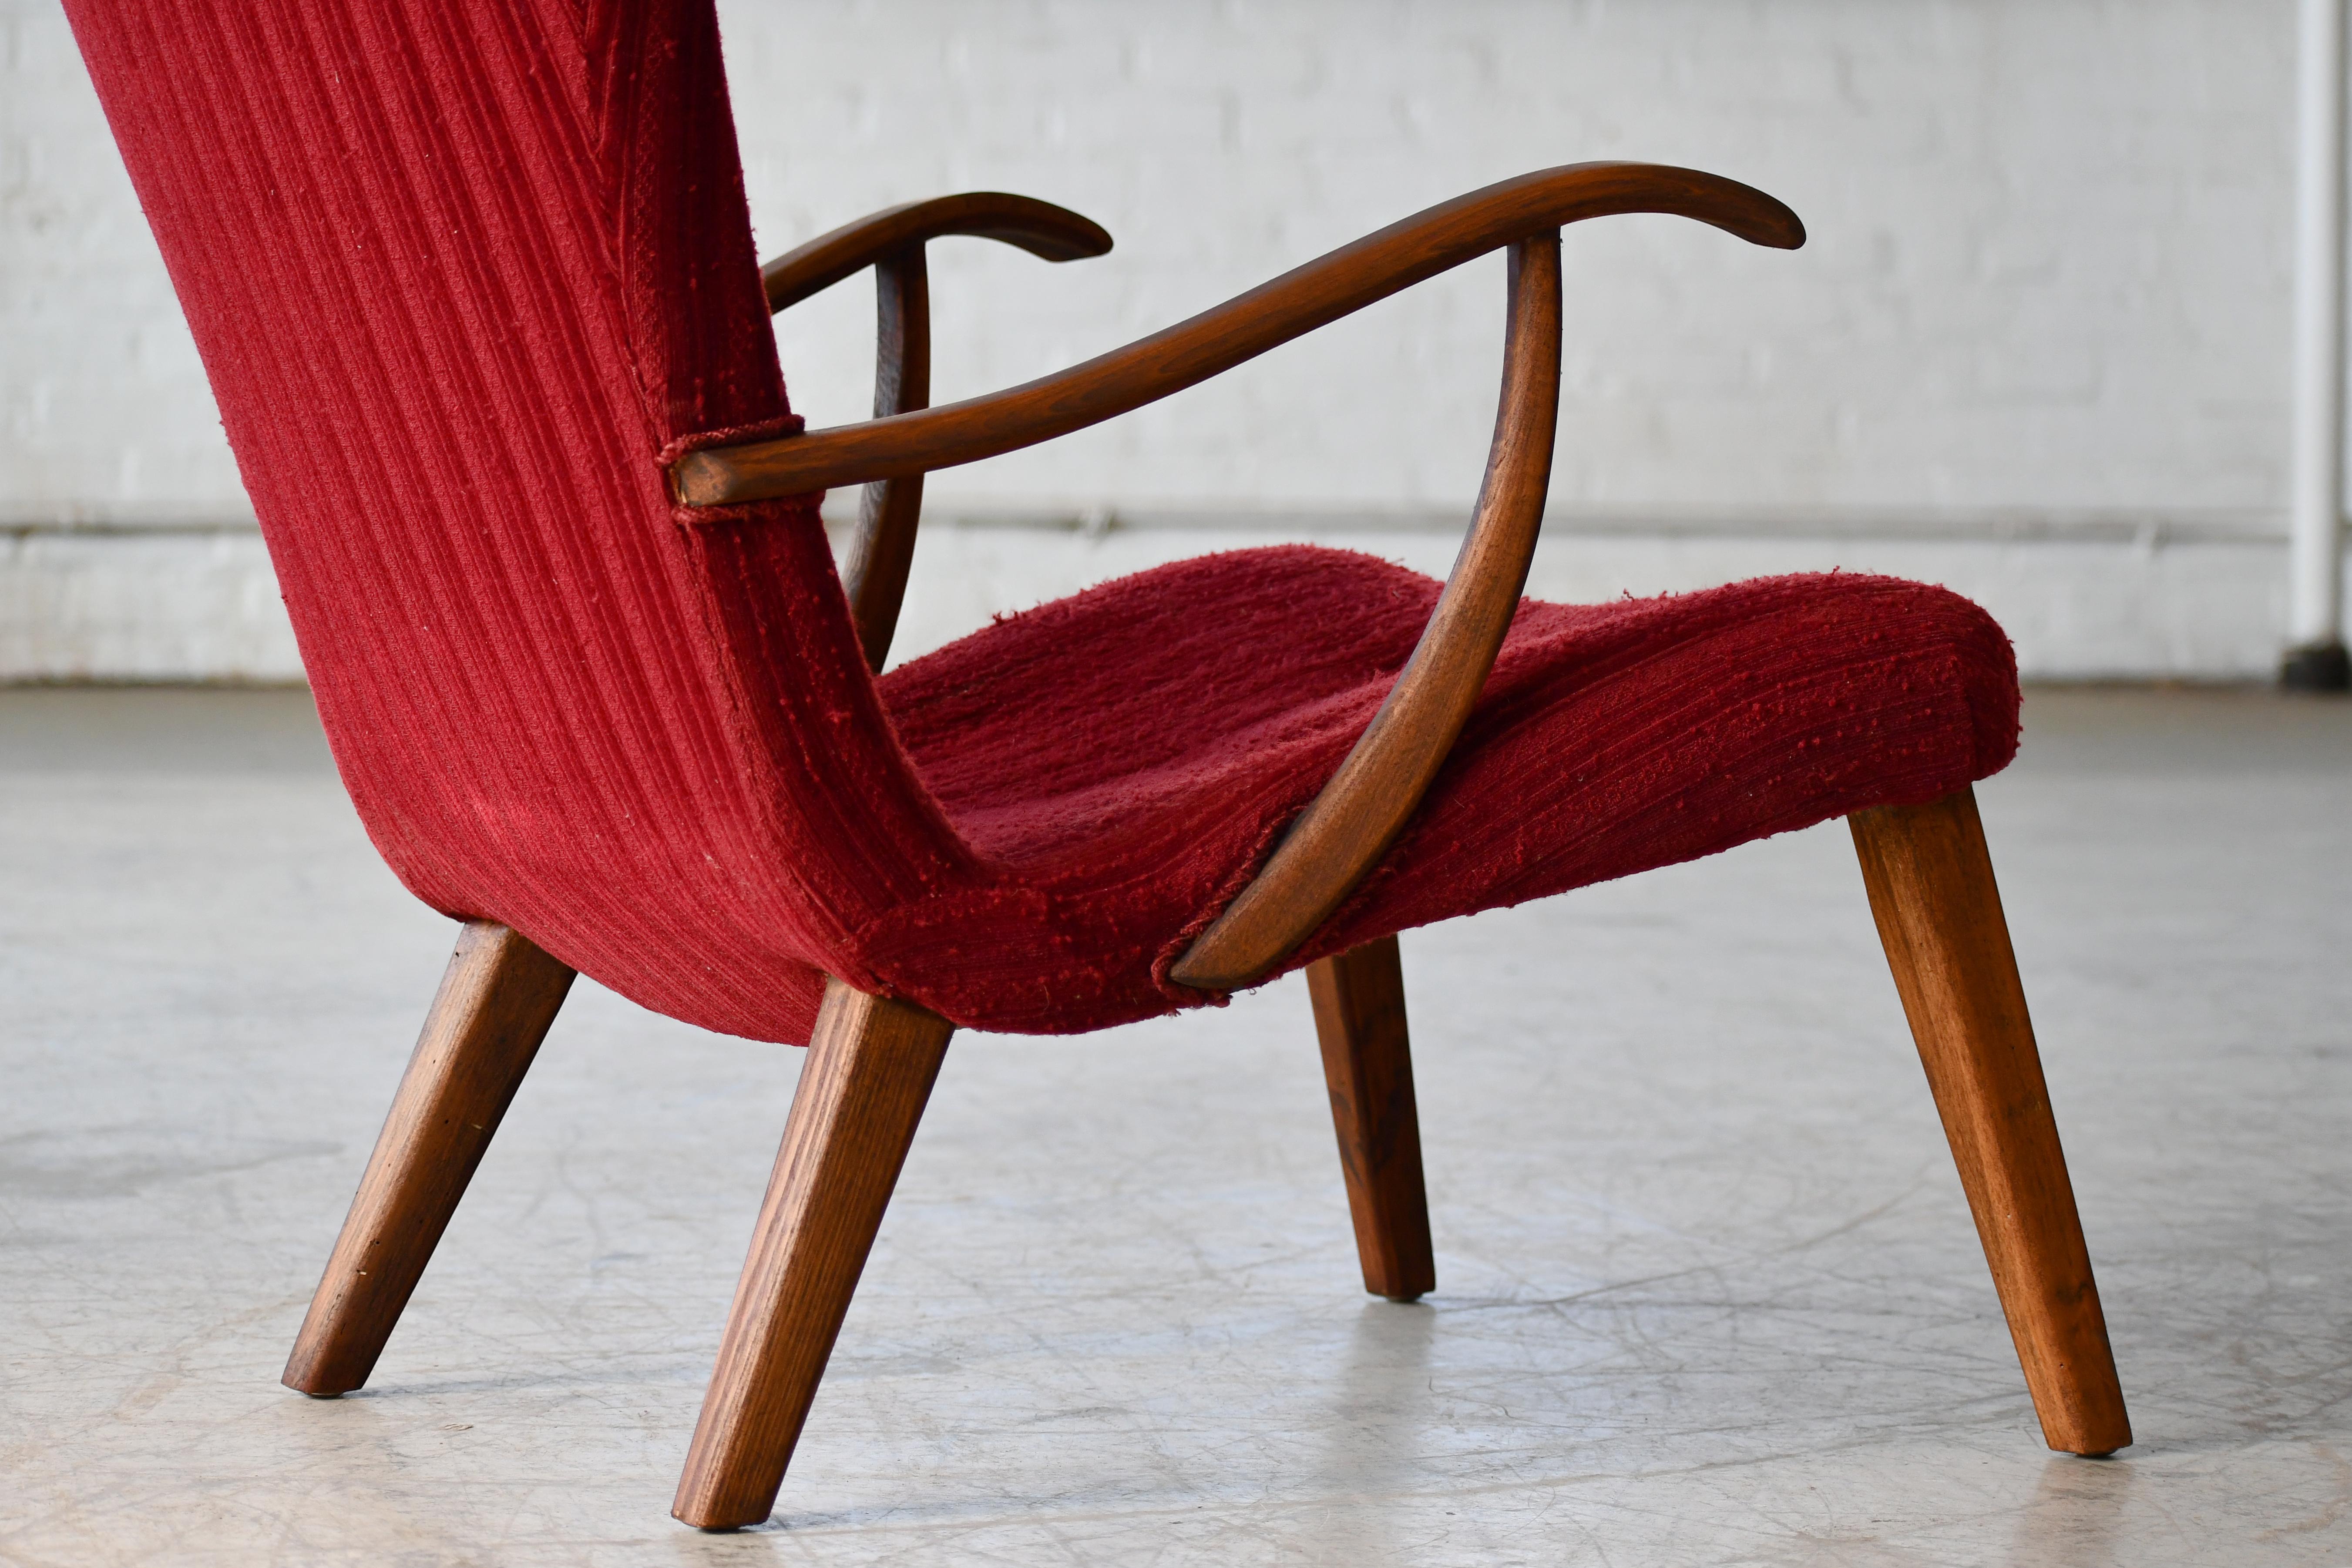 Midcentury Danish Clam Style Lounge Chair, 1950s For Sale 3